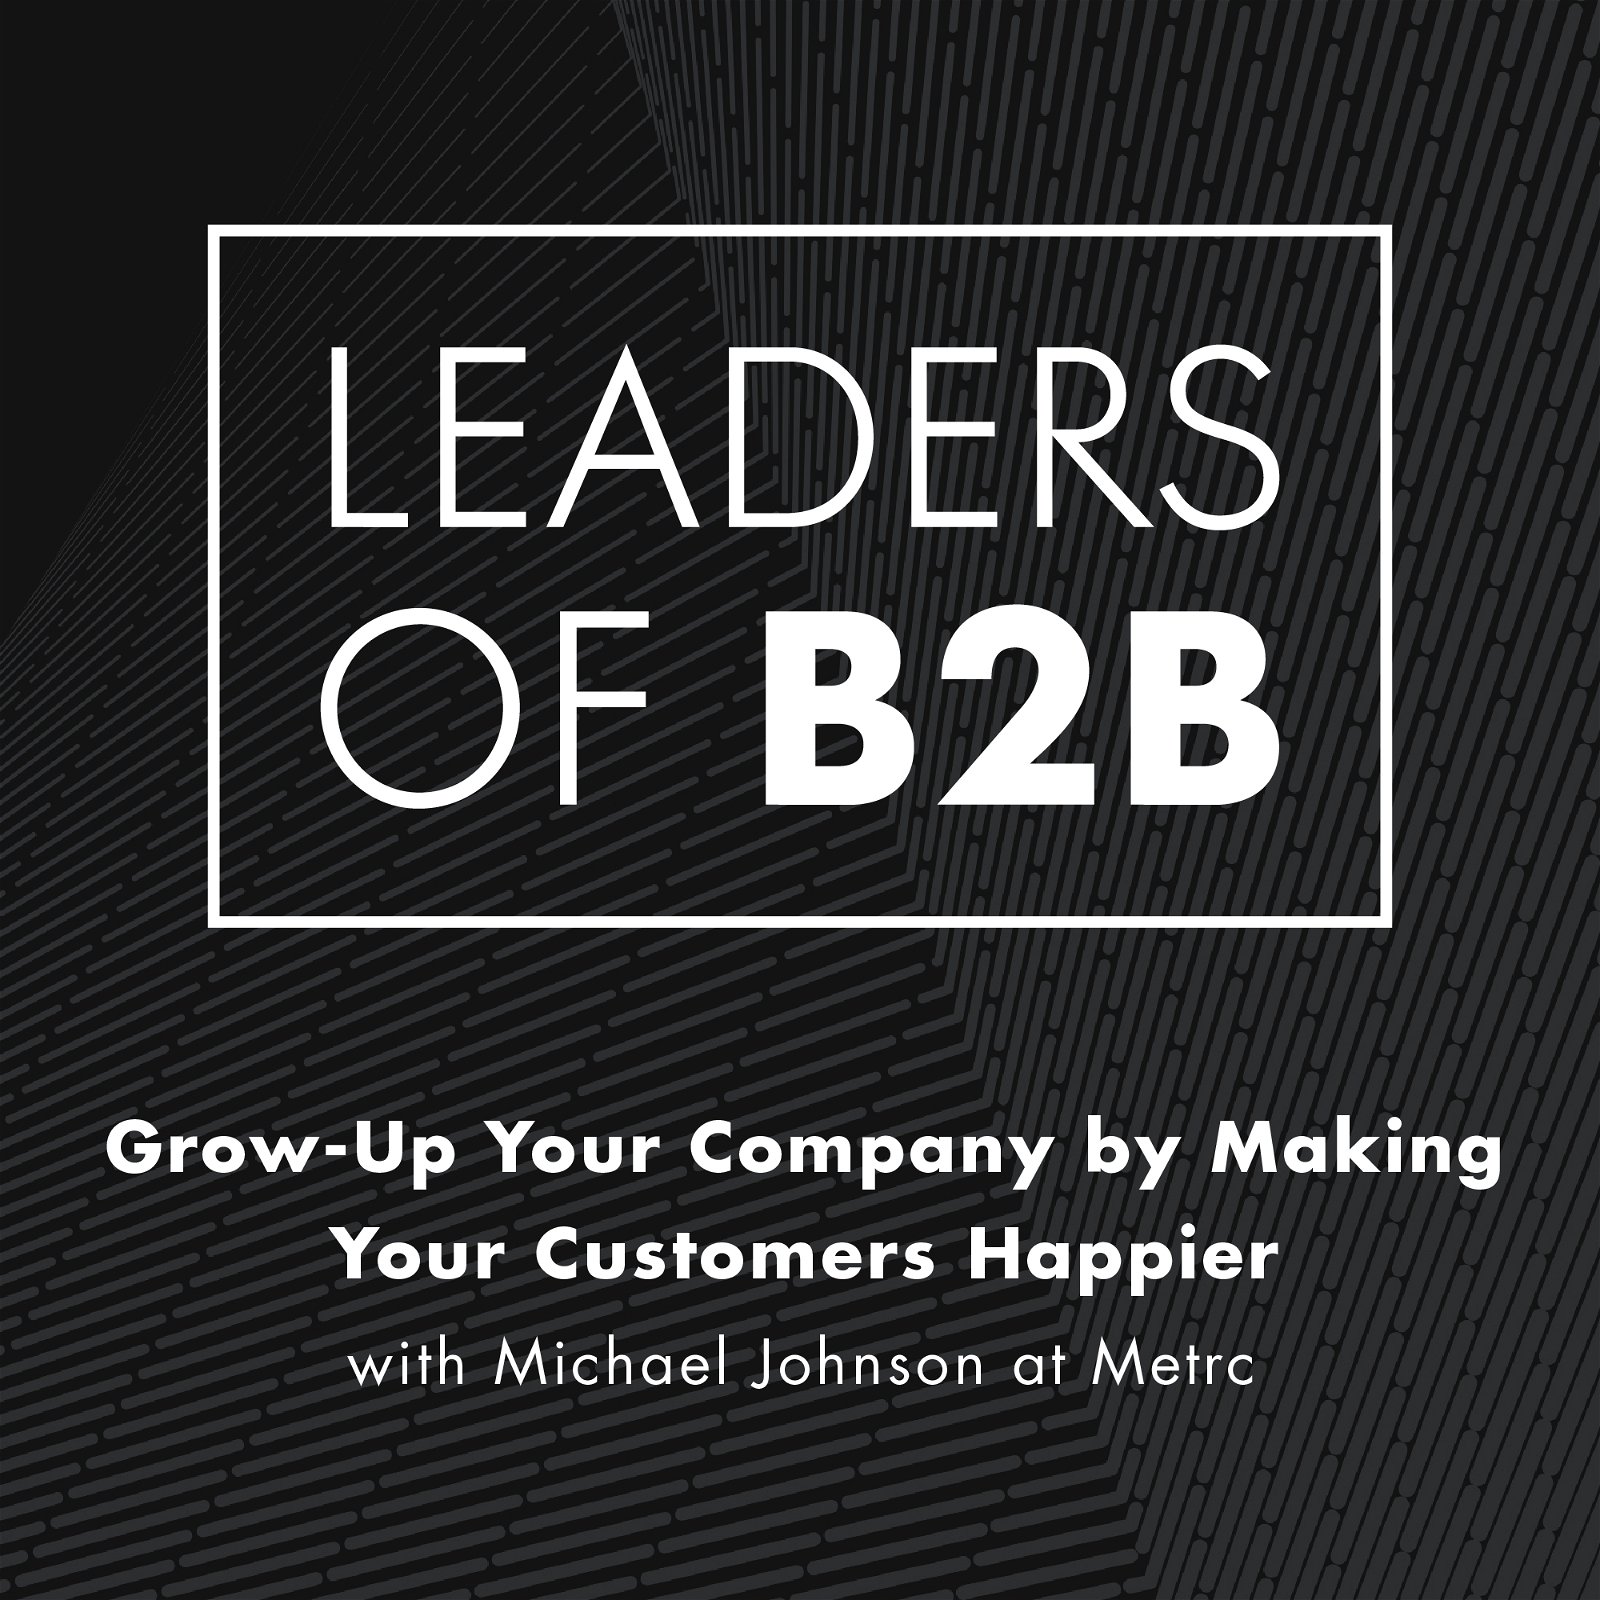 Grow-Up Your Company by Making Your Customers Happier with Michael Johnson at Metrc